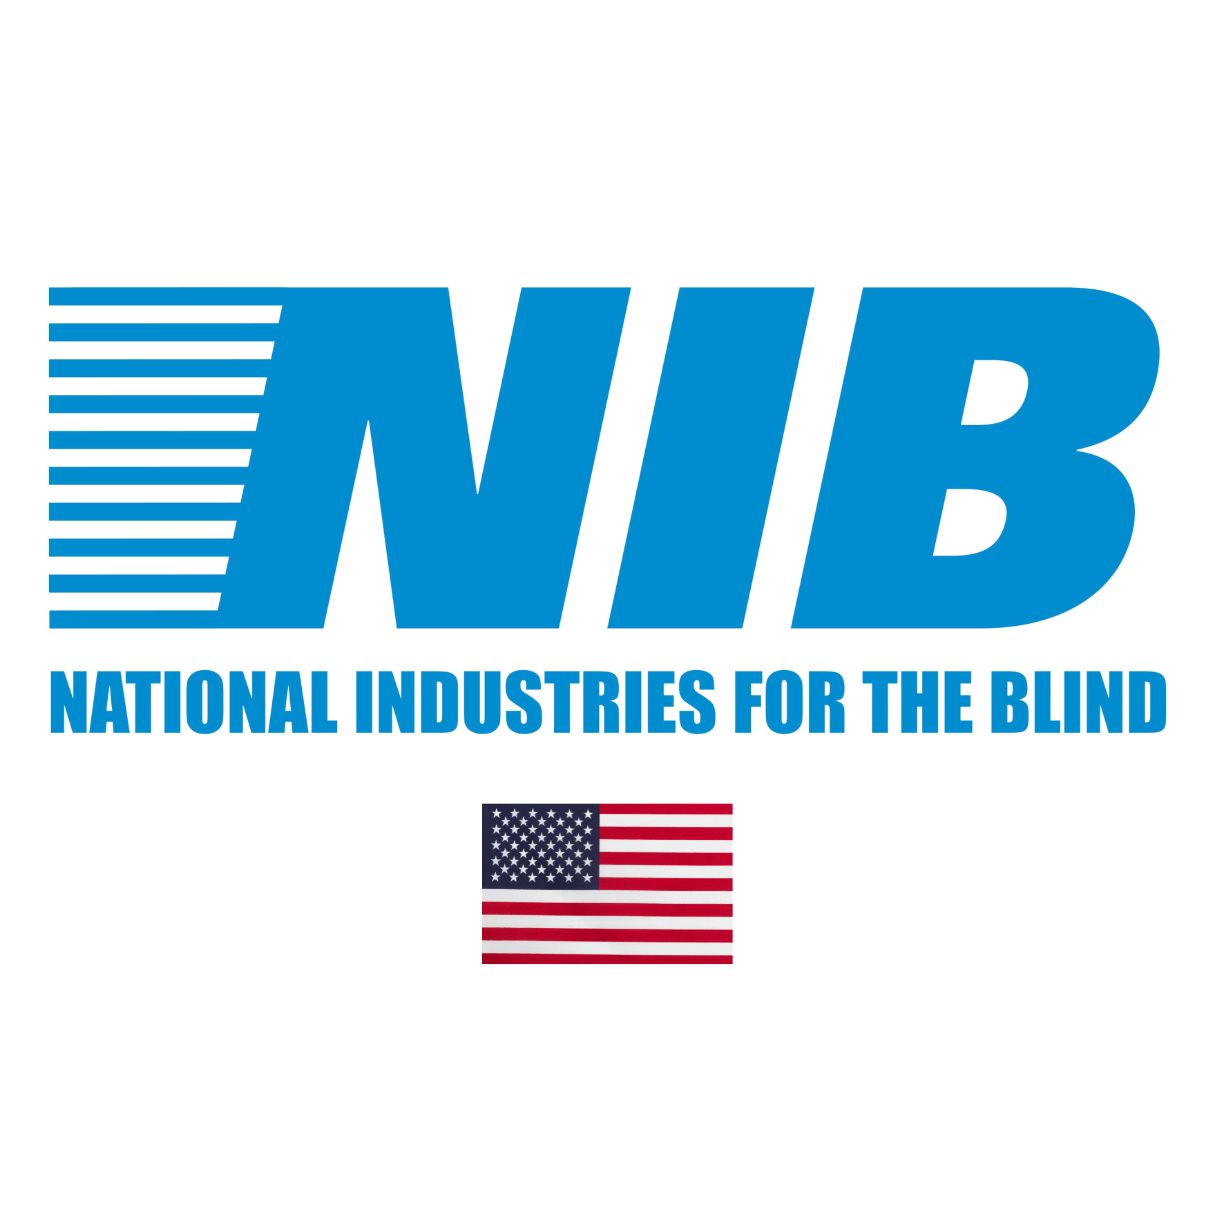 National Industries For The Blind Logo and United States flag